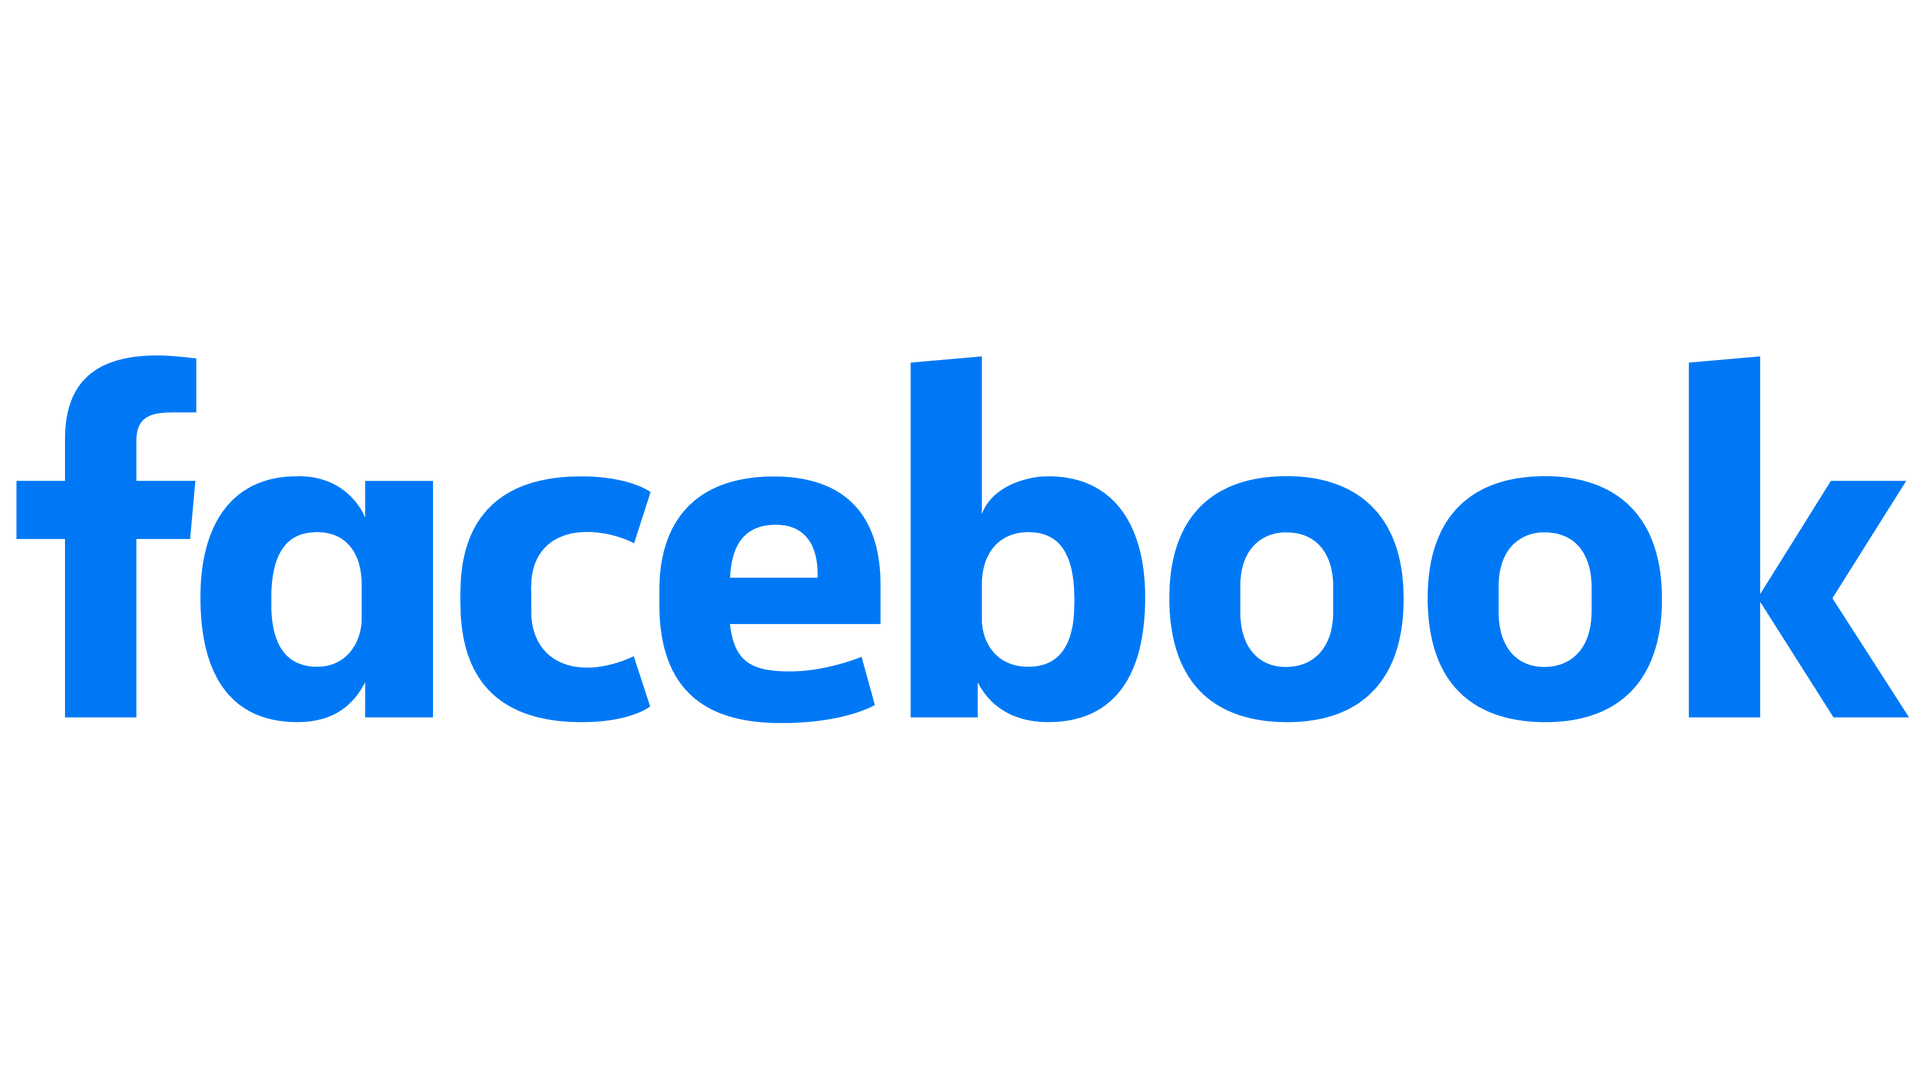 The facebook logo is blue and white on a white background.